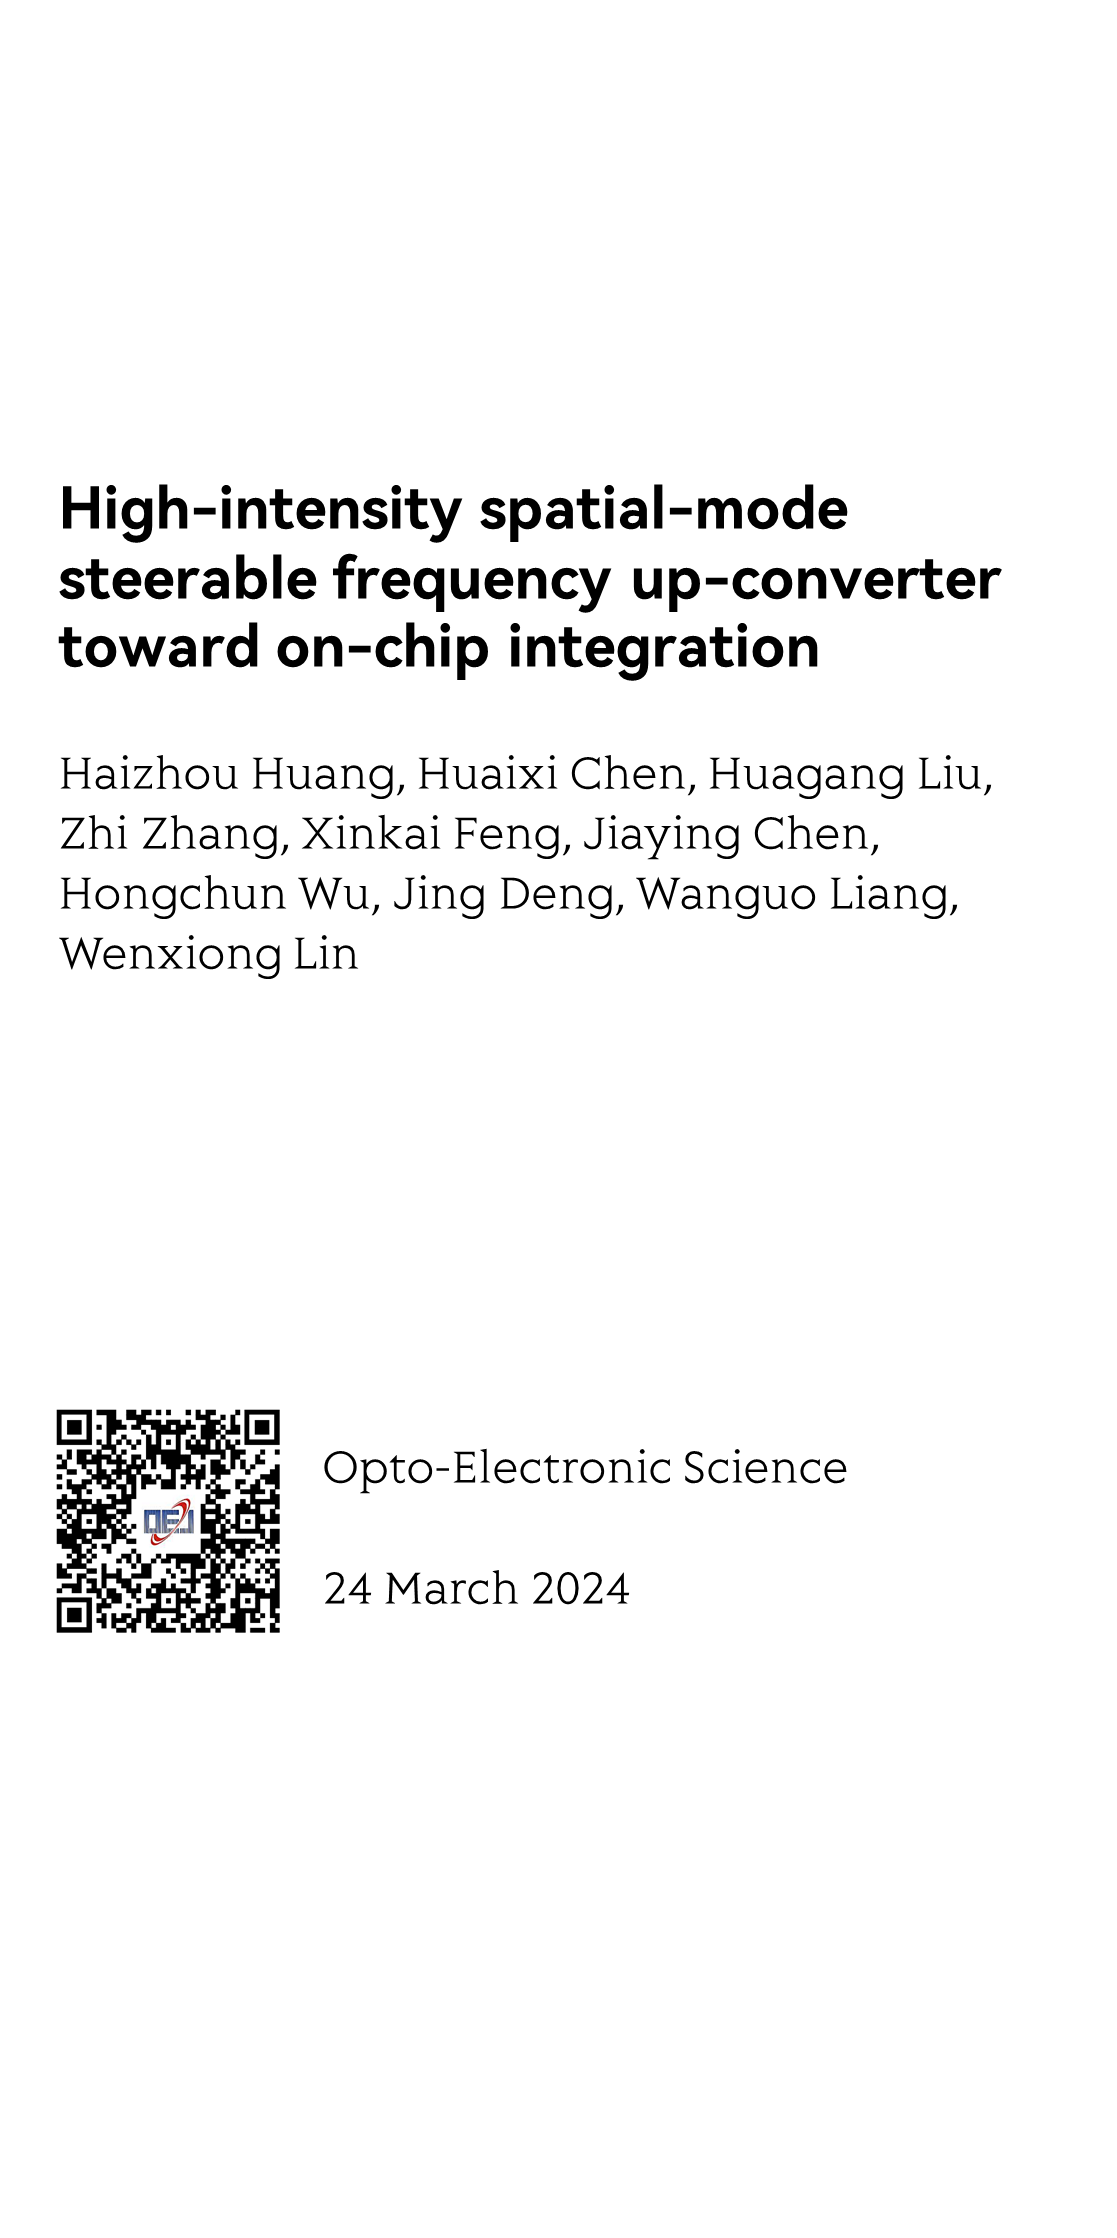 High-intensity spatial-mode steerable frequency up-converter toward on-chip integration_1